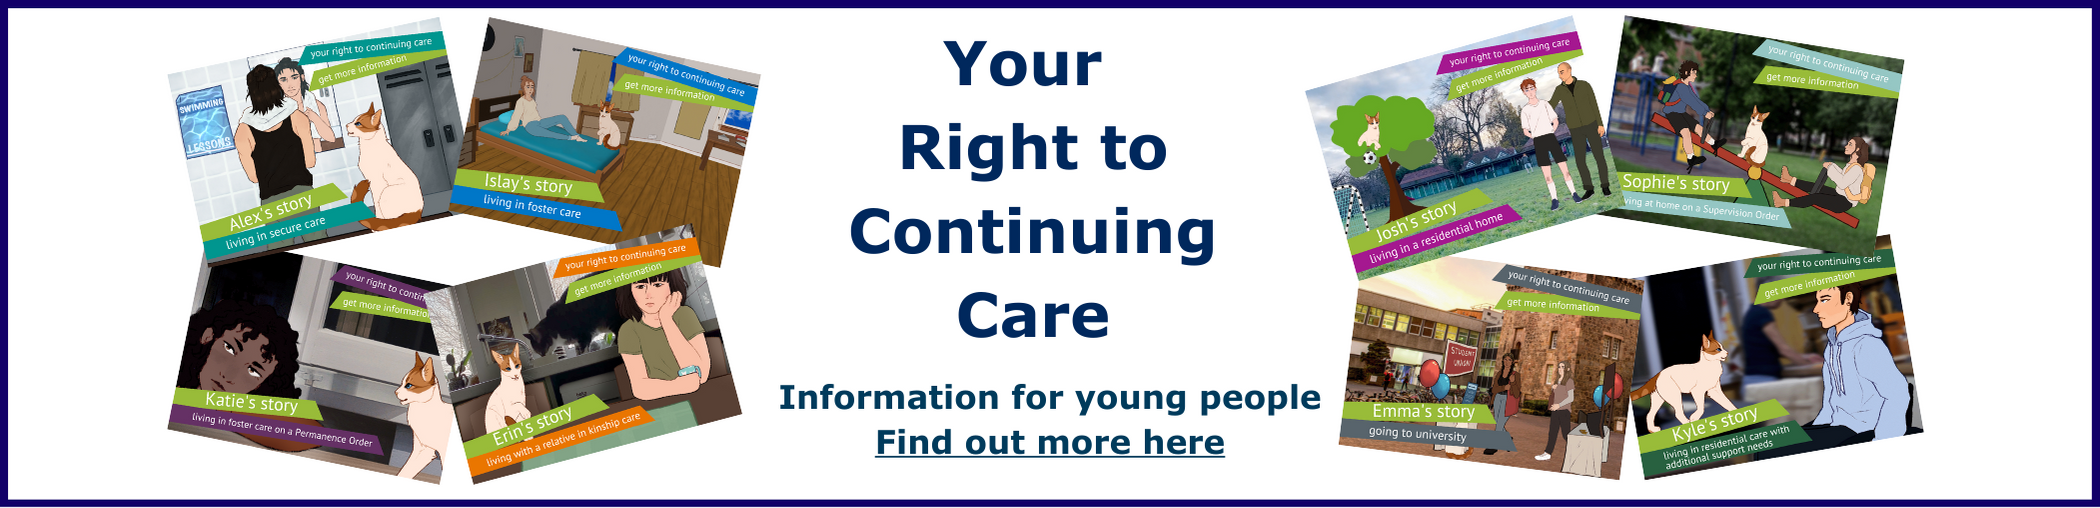 Your right to continuing care